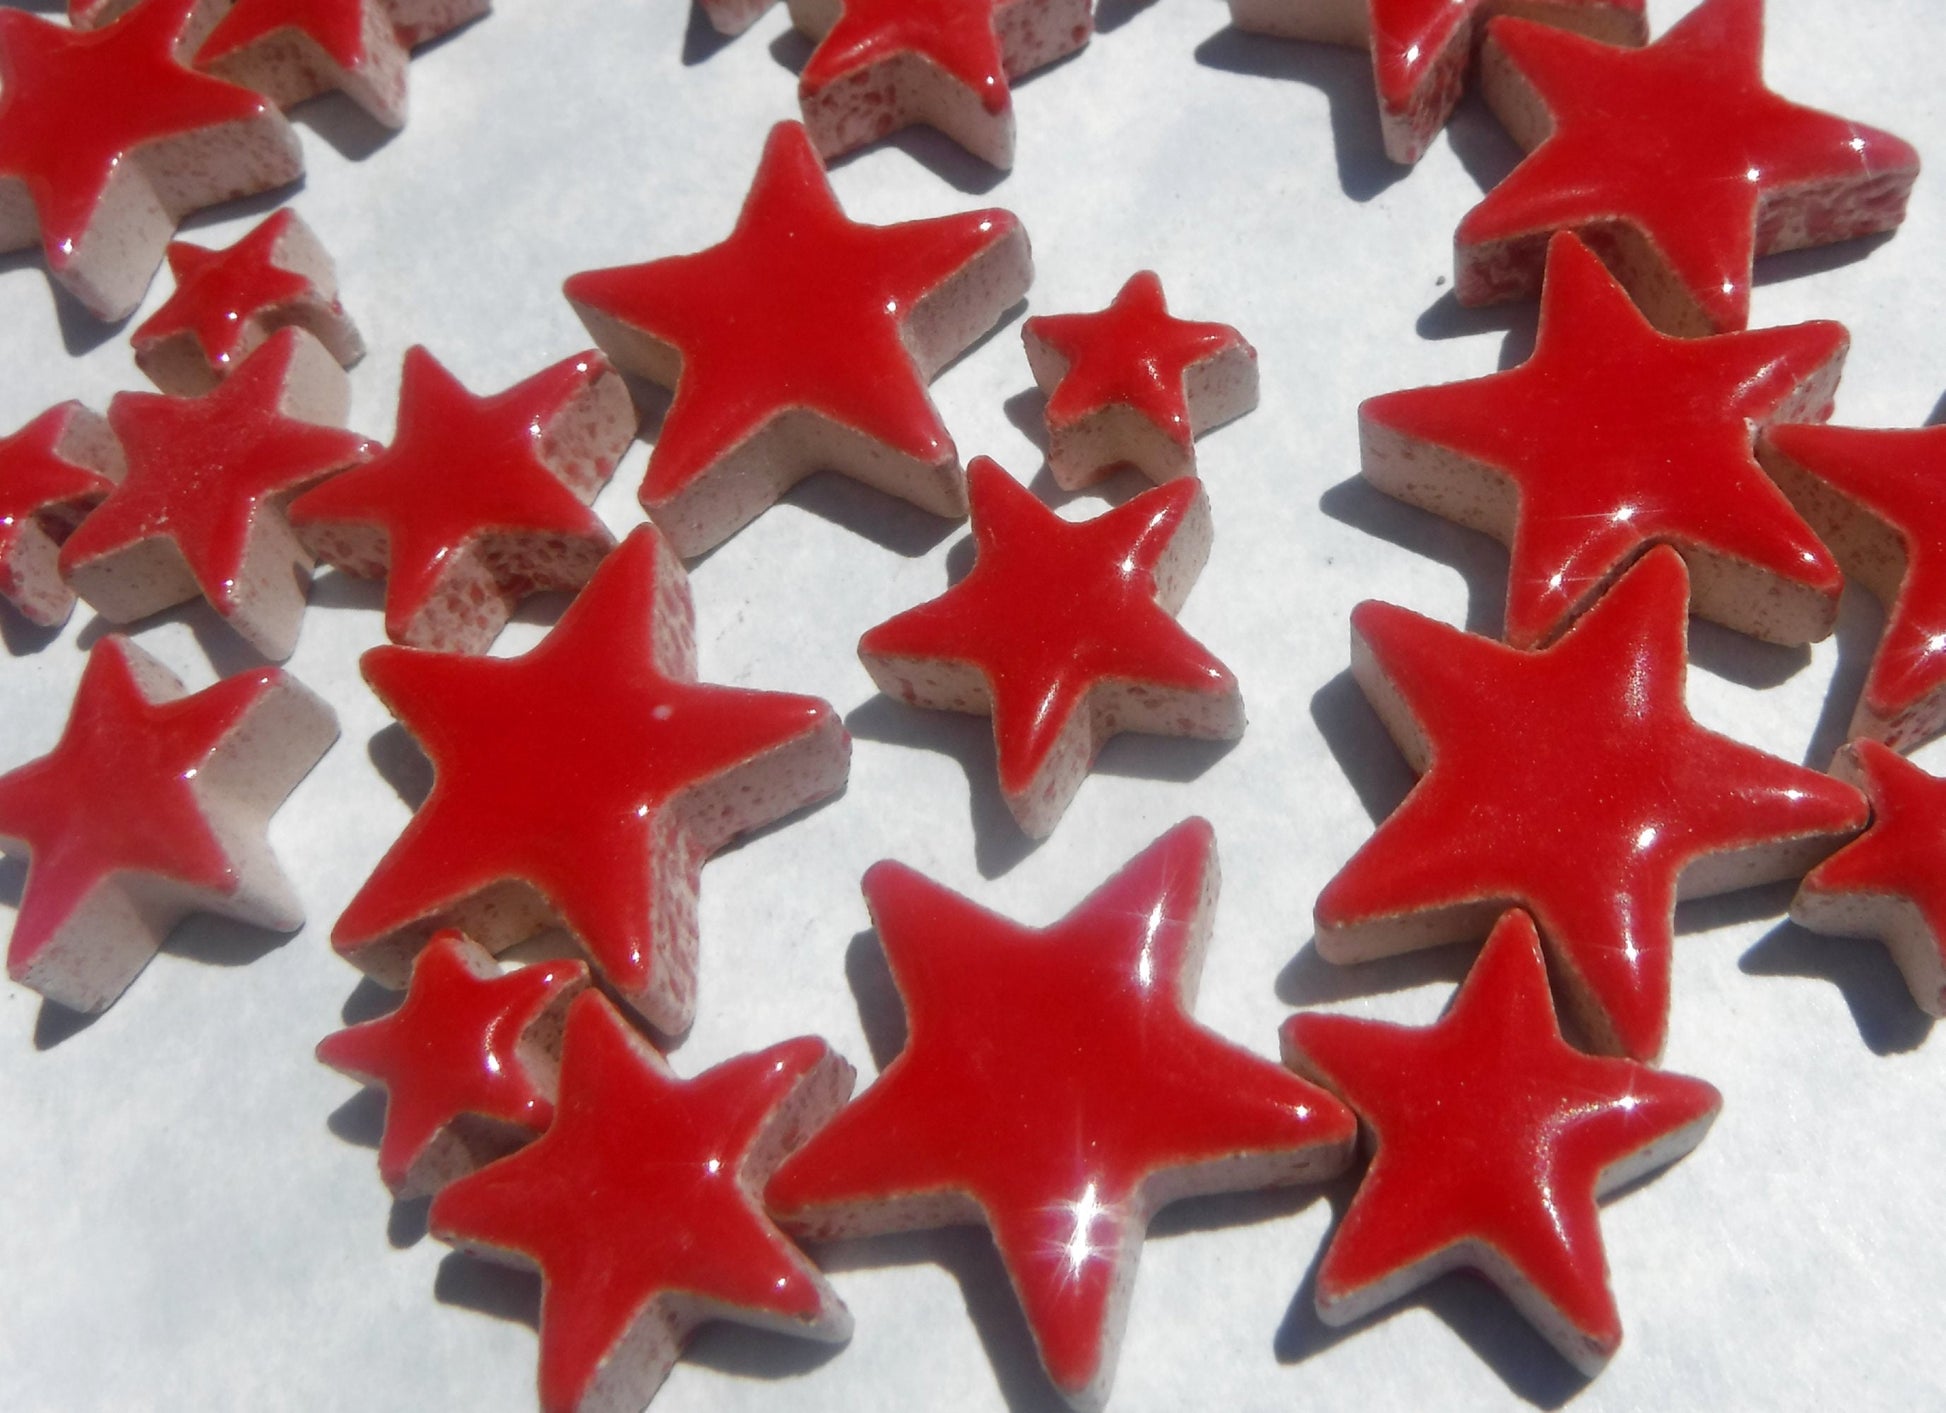 Red Stars Mosaic Tiles - 50g Ceramic in Mix of 3 Sizes - 20mm, 15mm, 10mm - Poppy Red